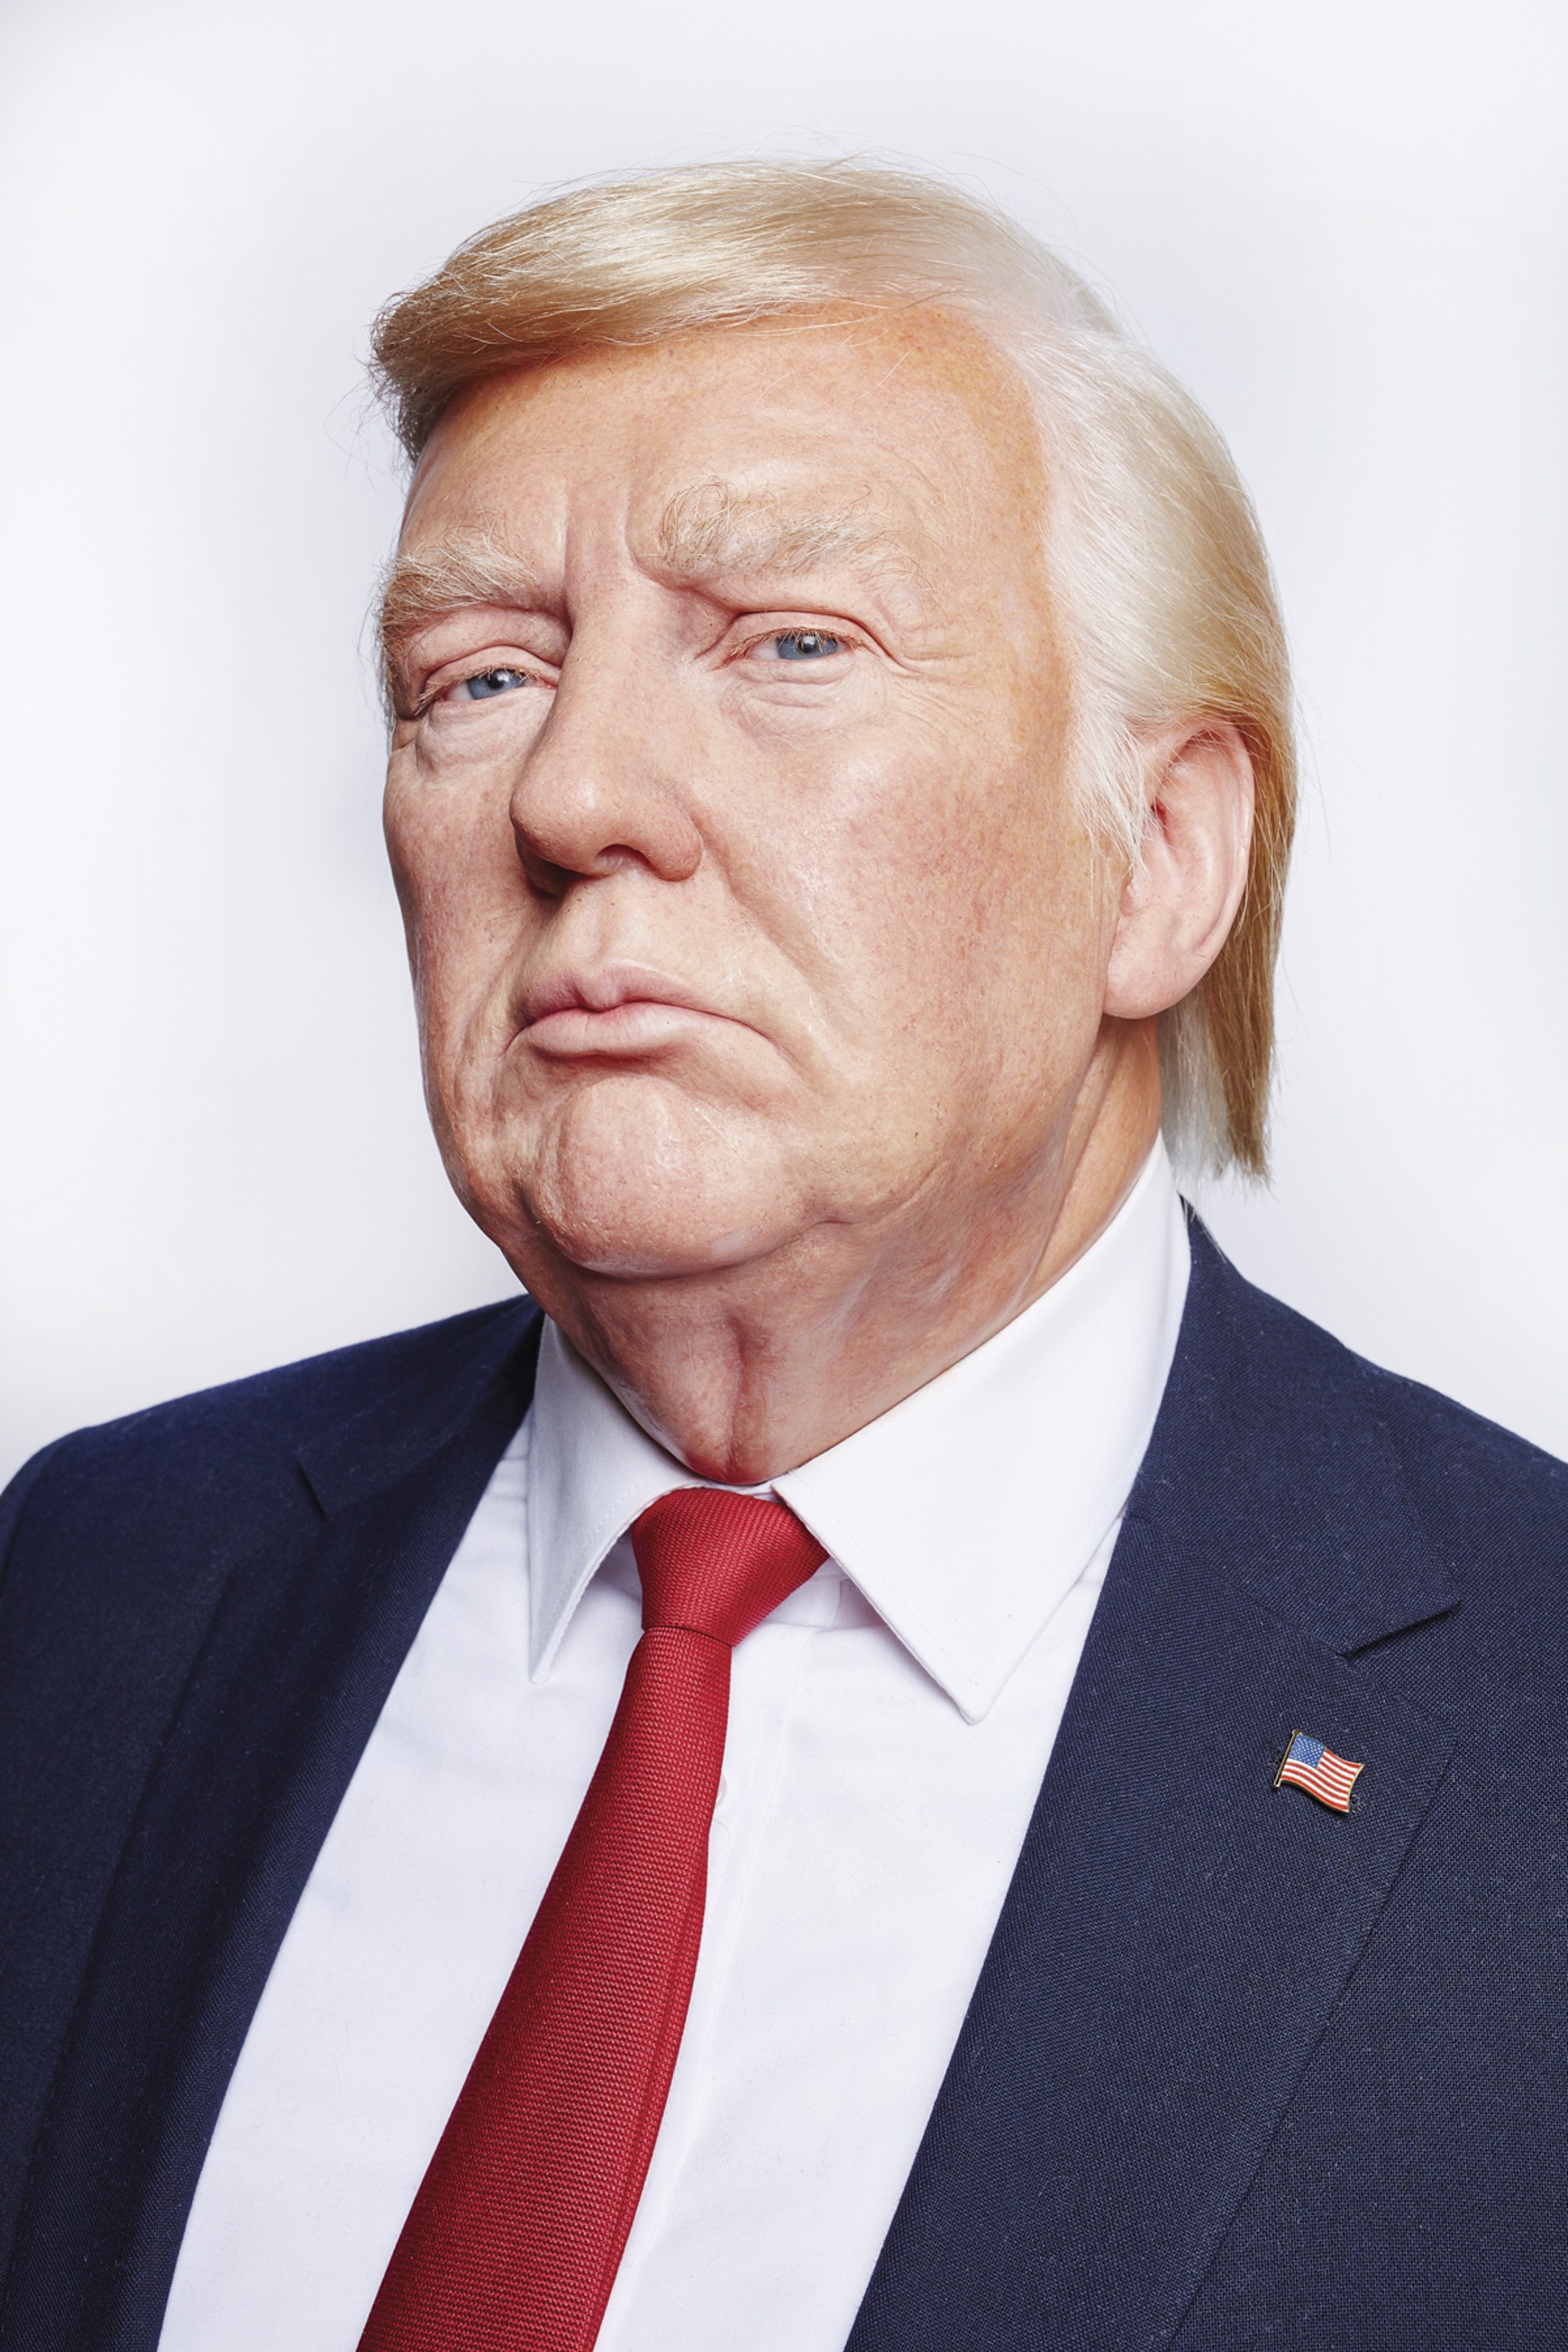 This is not Donald Trump by Peter Andrew Lusztyk | Uncanny Valley